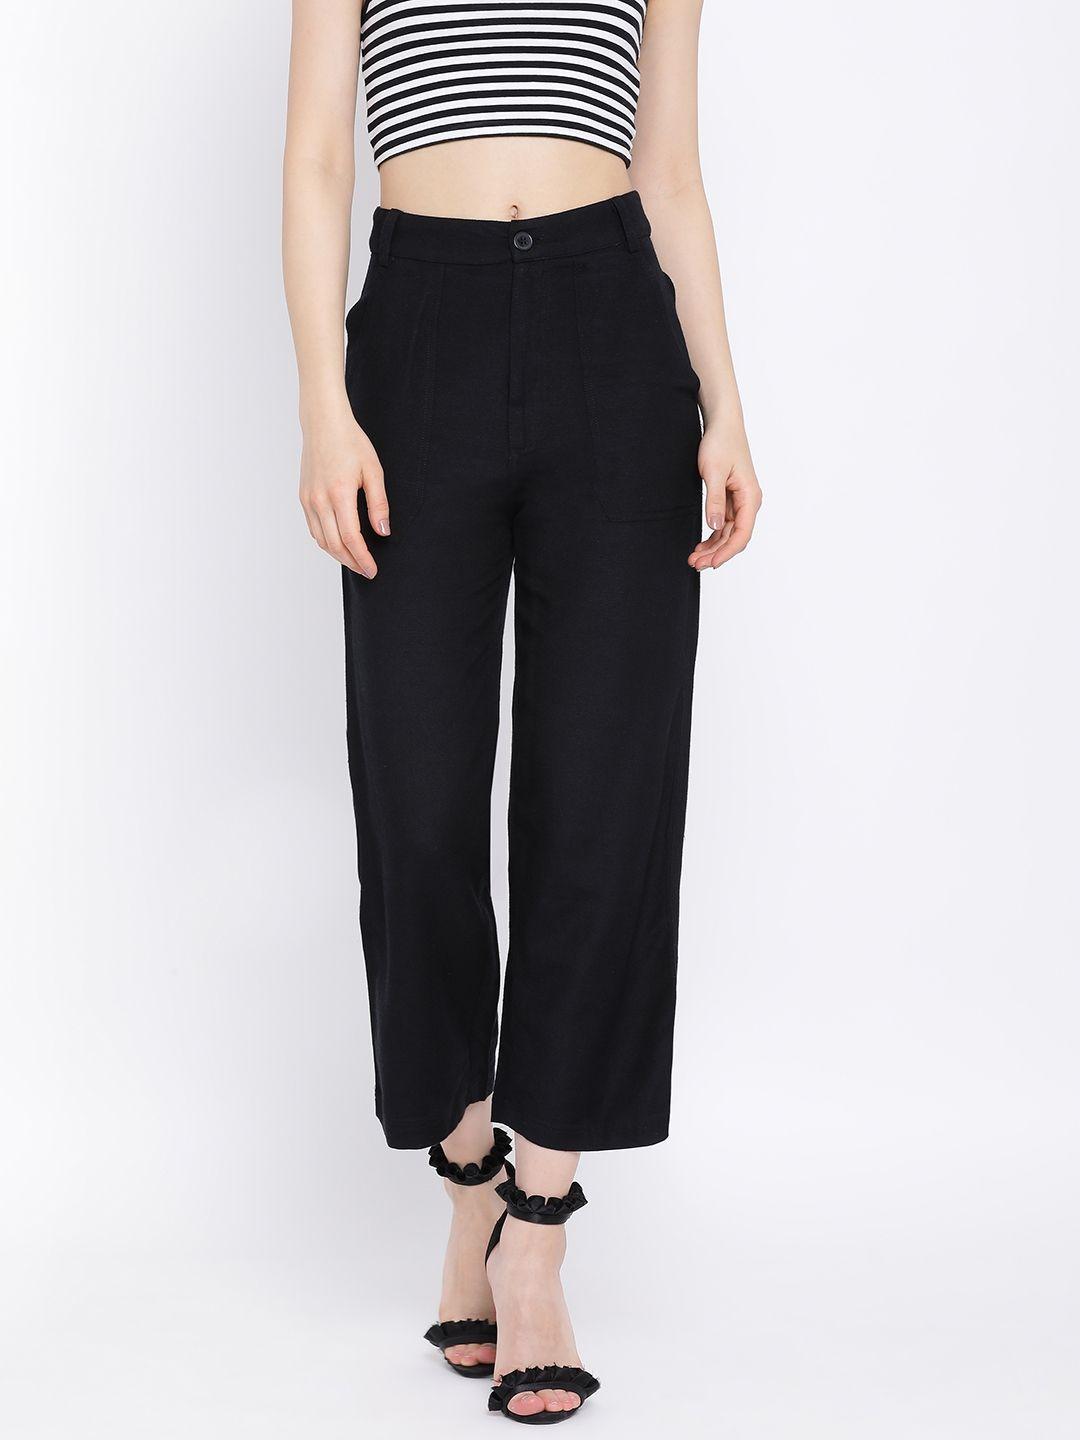 oxolloxo-women-black-regular-fit-solid-cropped-trousers